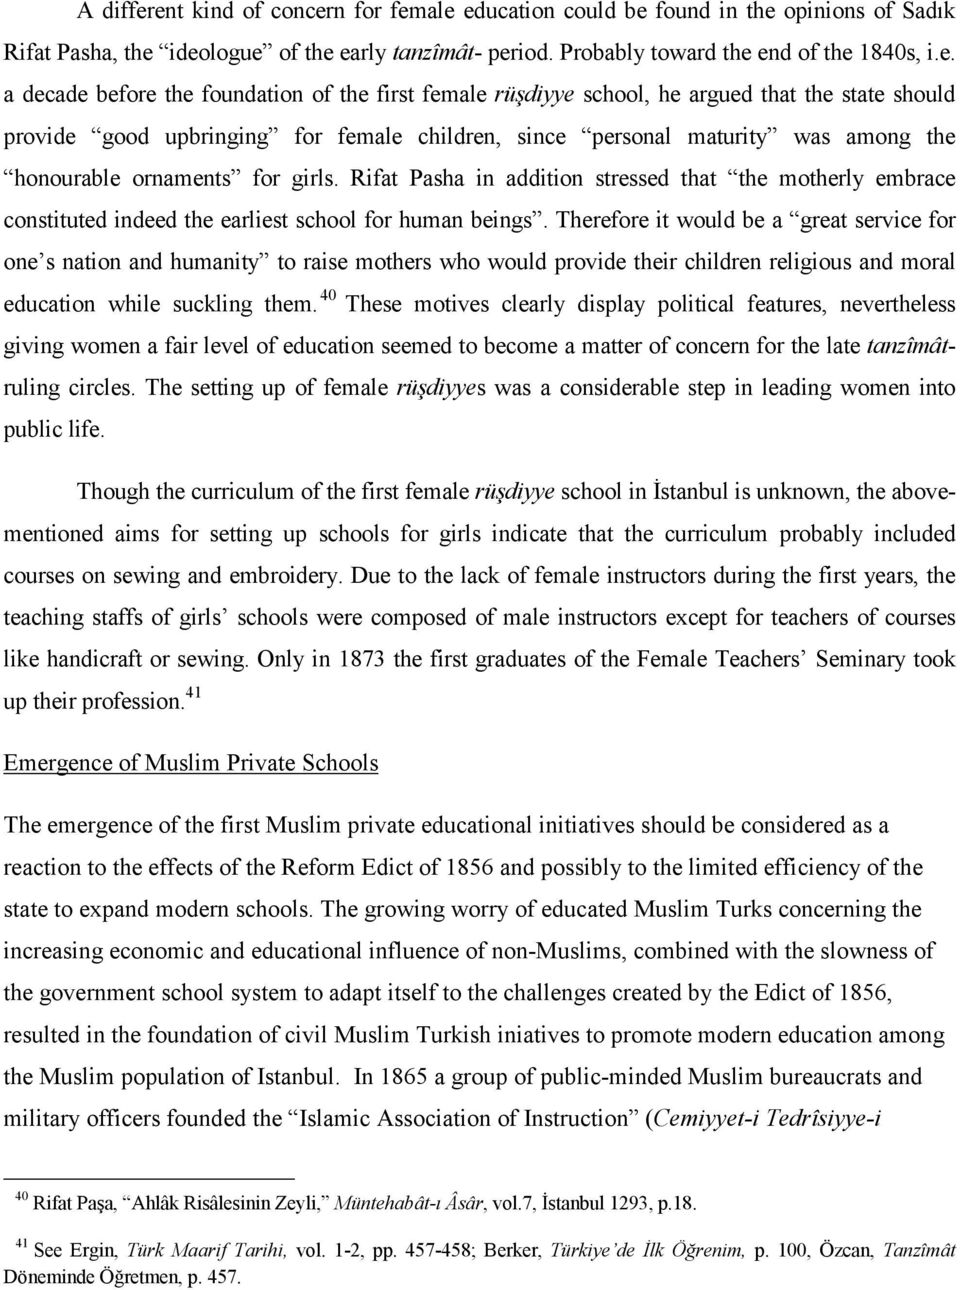 the foundation of the first female rüşdiyye school, he argued that the state should provide good upbringing for female children, since personal maturity was among the honourable ornaments for girls.